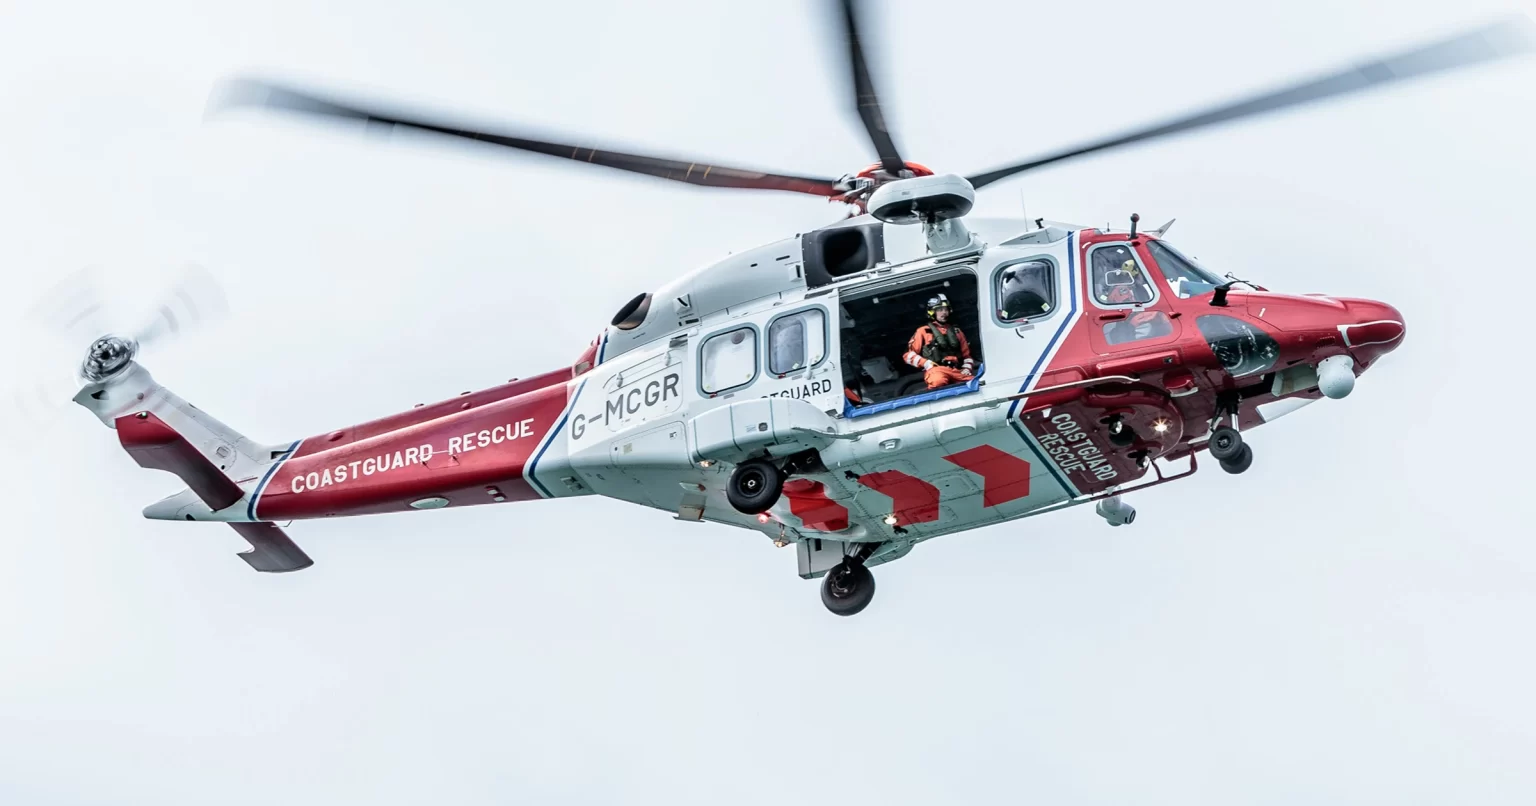 Man missing after falling overboard from installation in North Sea